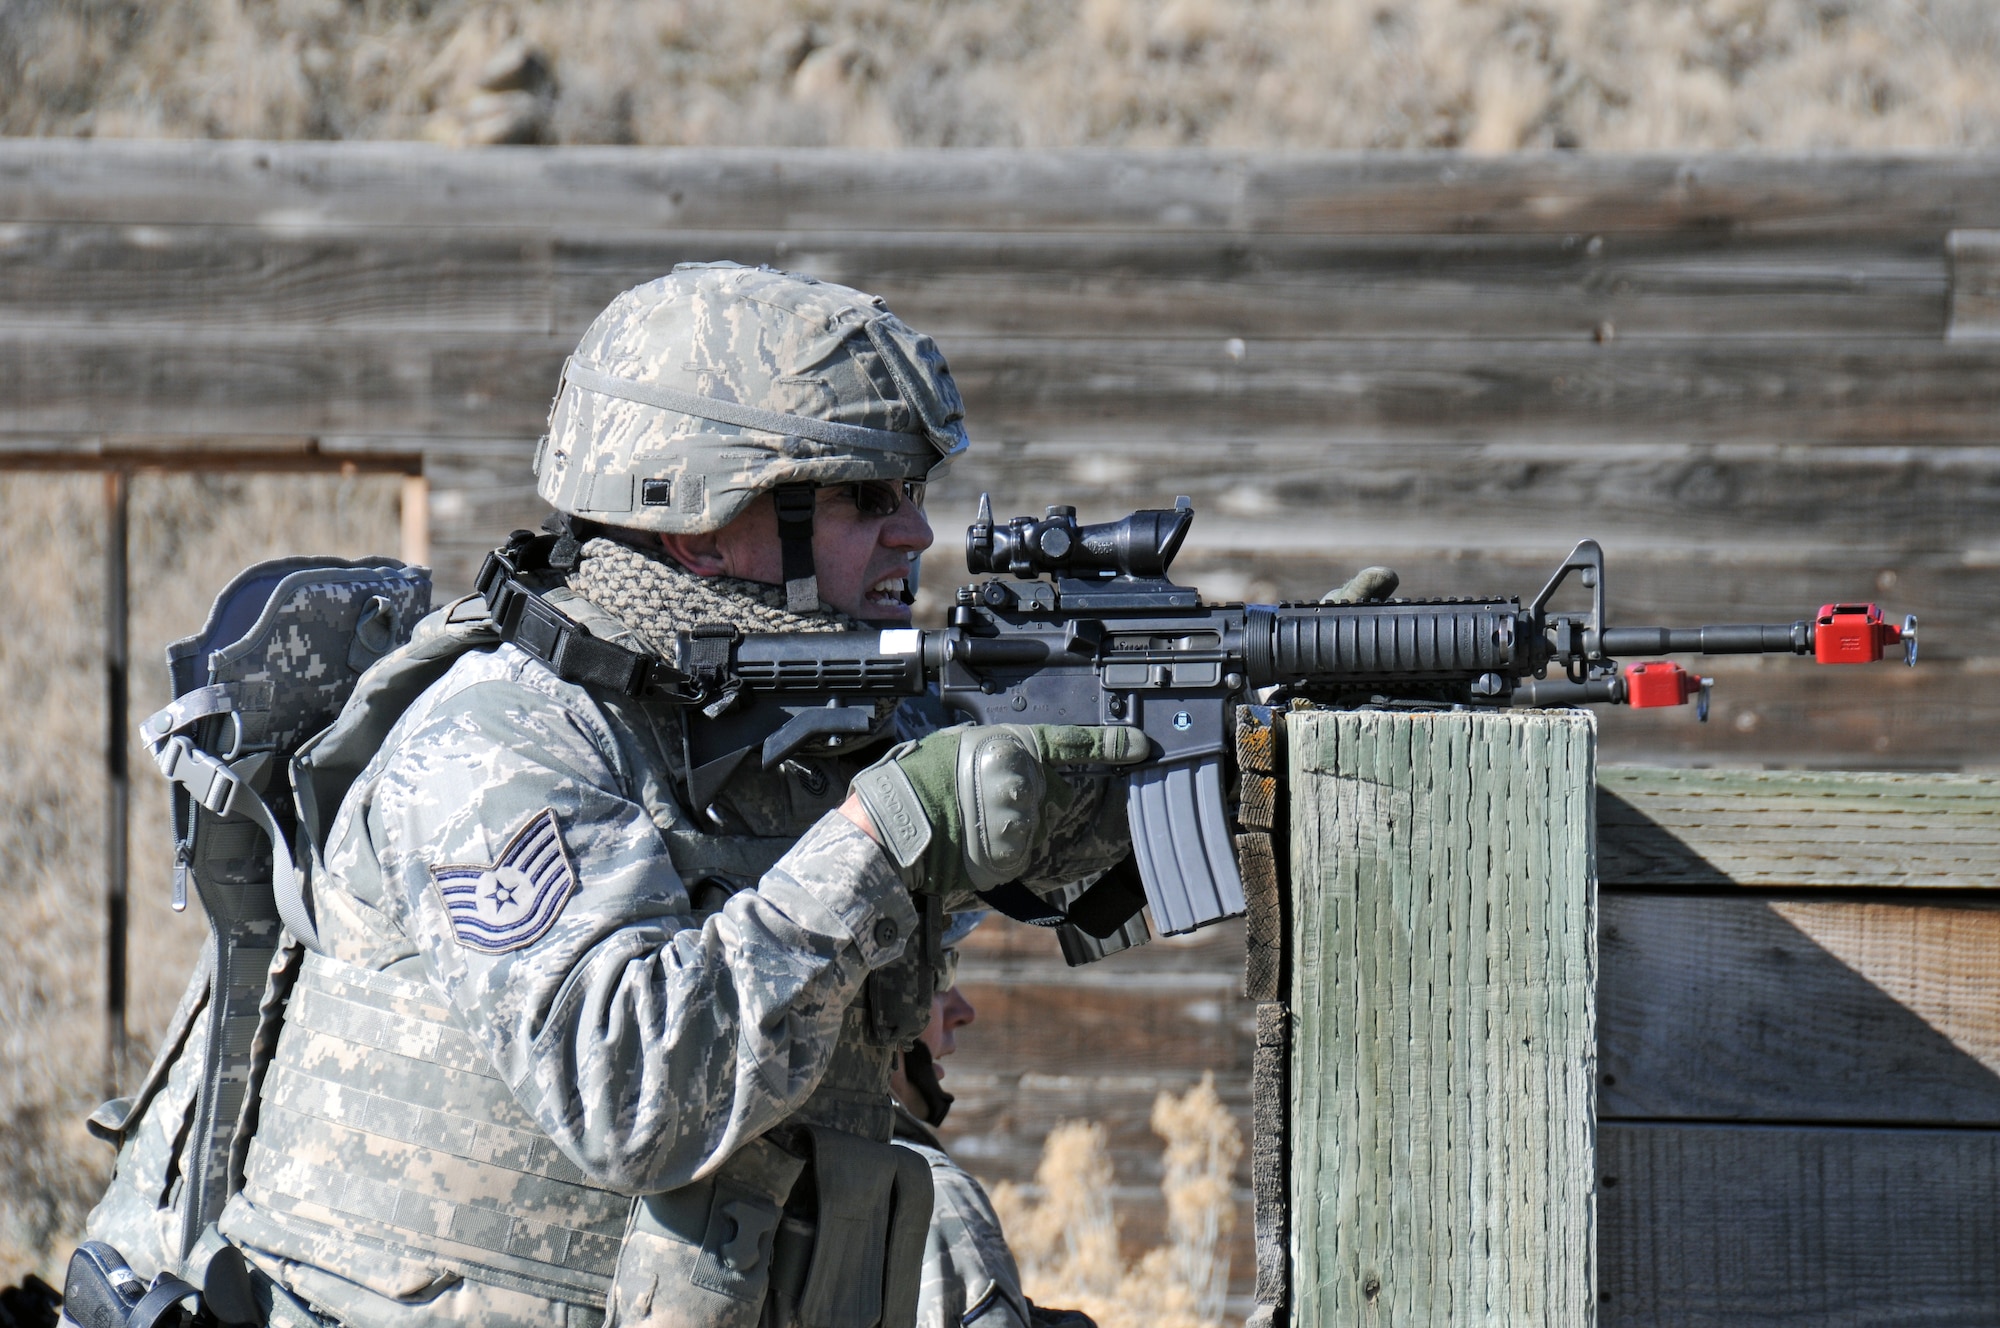 Tech. Sgt. Alan Robins, 151st Security Forces Squadron, participates in a 
simulated assault on a village during a training exercise on March 9, 2015 at 
the Military Operations in Urban Terrain Range at Camp Williams, Utah. (Air National Guard photo by Staff Sgt. Annie Edwards/RELEASED)